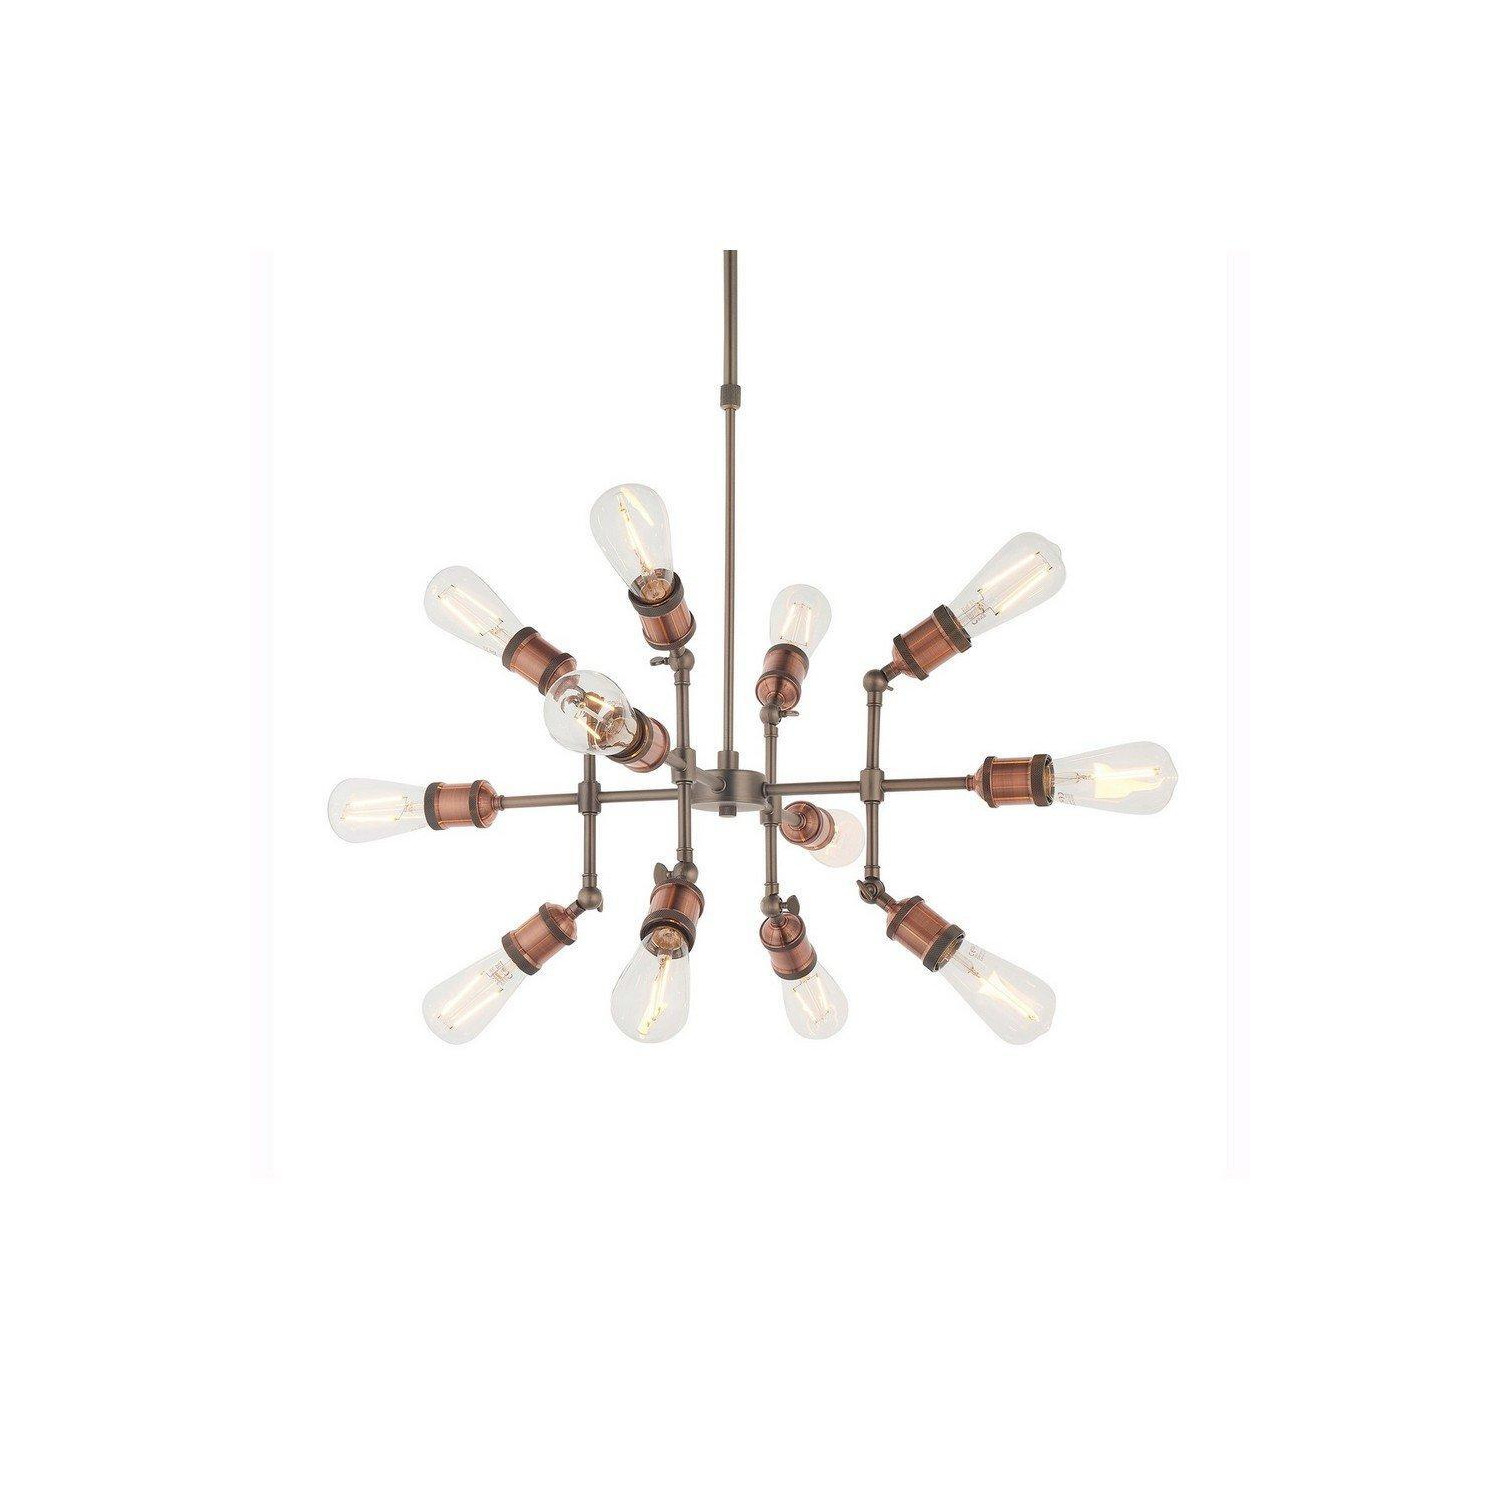 Hal Large Industrial Style Multi Arm Pendant Light Aged Pewter & Copper with Adjustable Heads - image 1